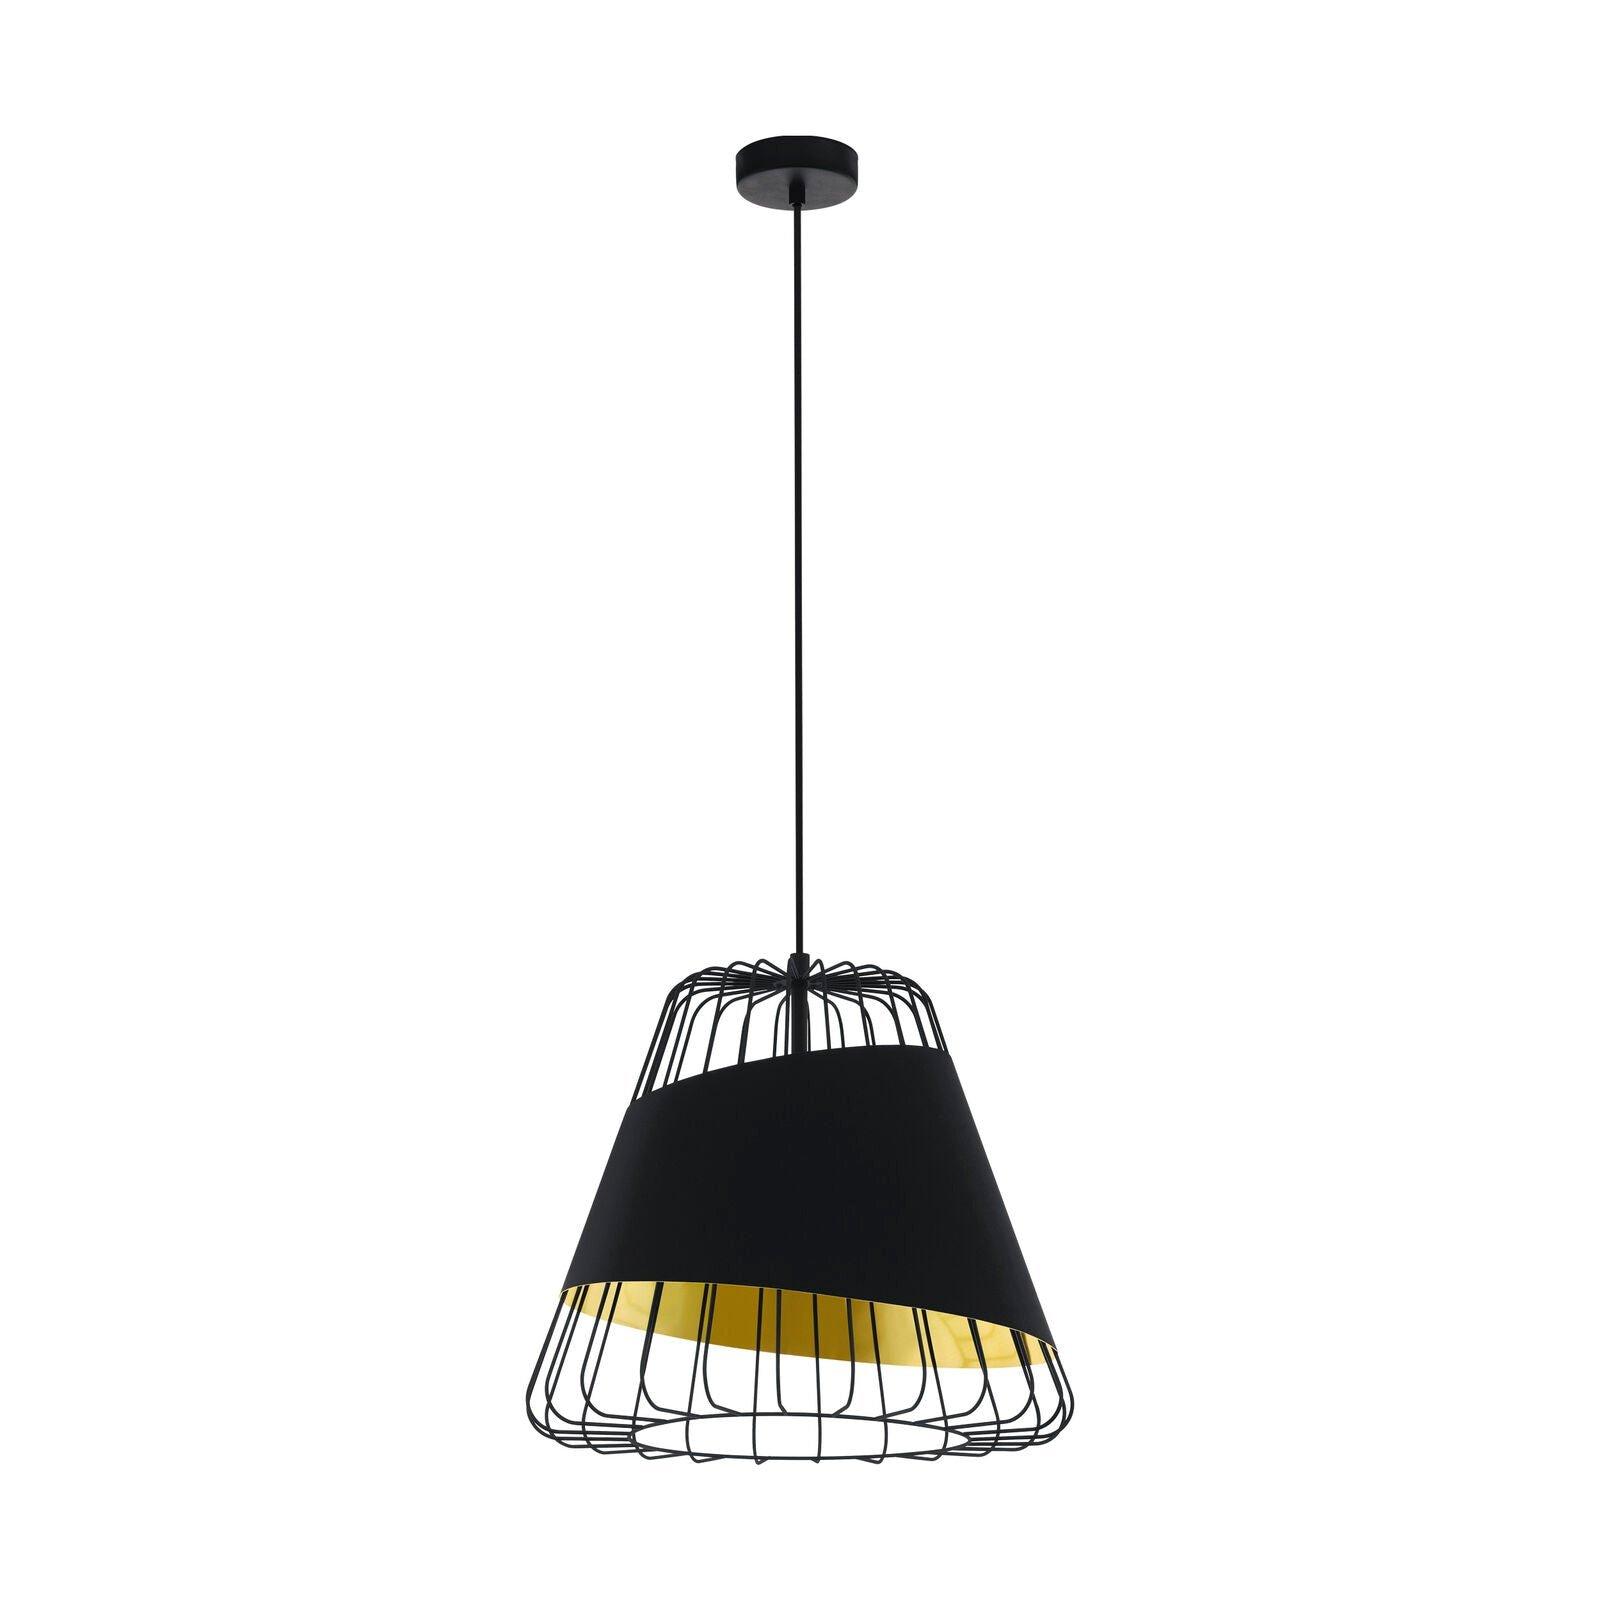 Hanging Ceiling Pendant Light Black Wire & Gold 1x 60W E27 Feature Lamp